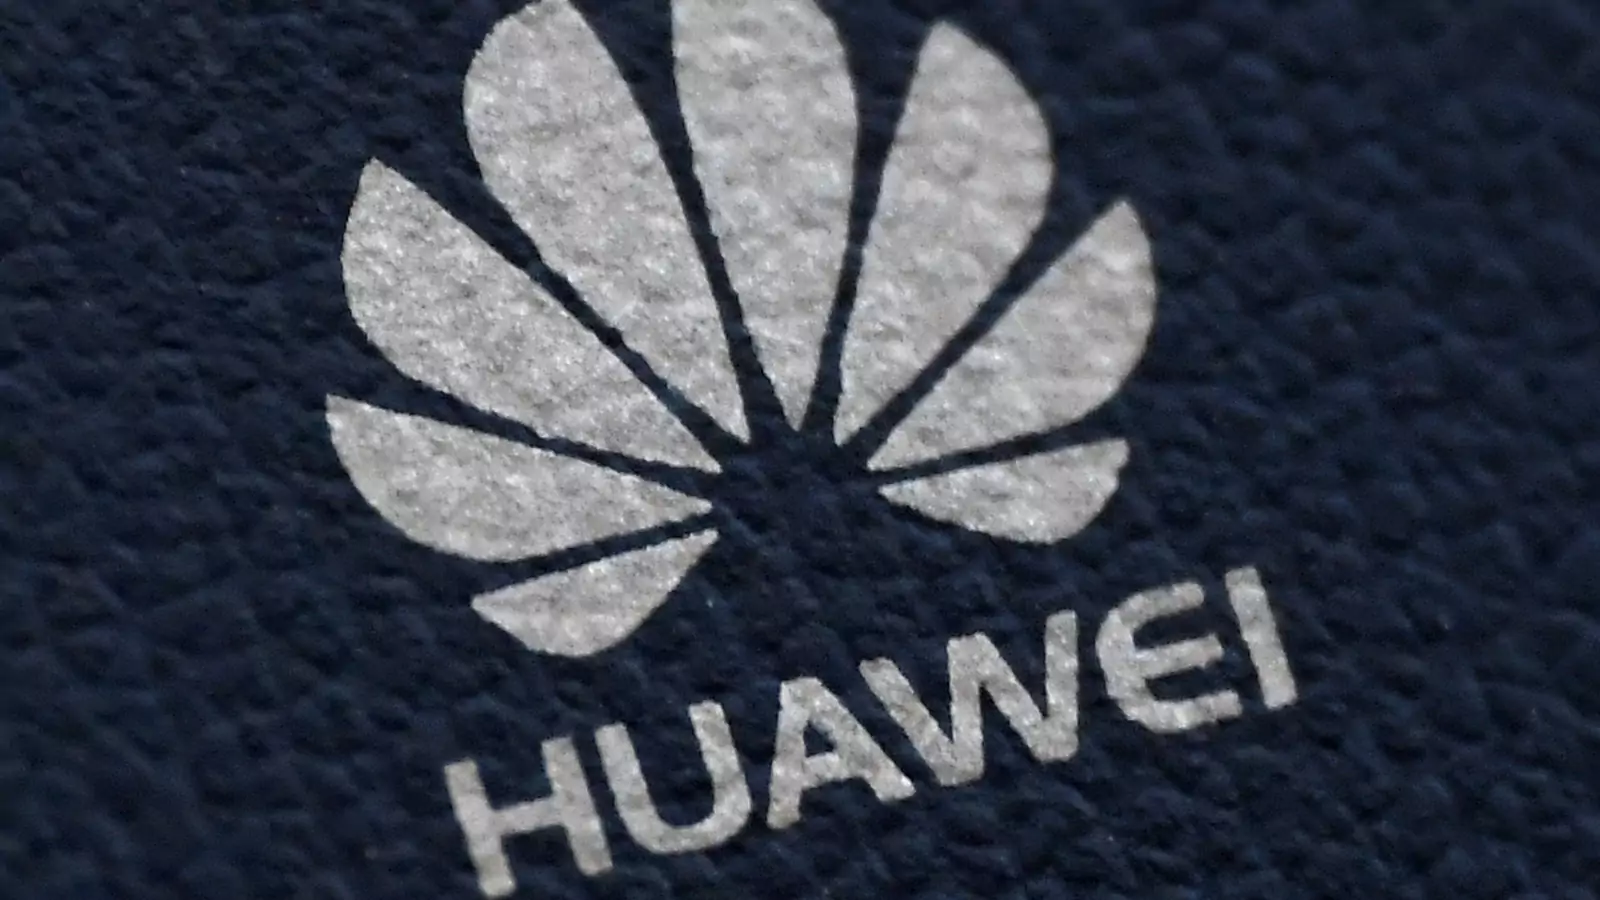 The Huawei logo is seen on a communications device.